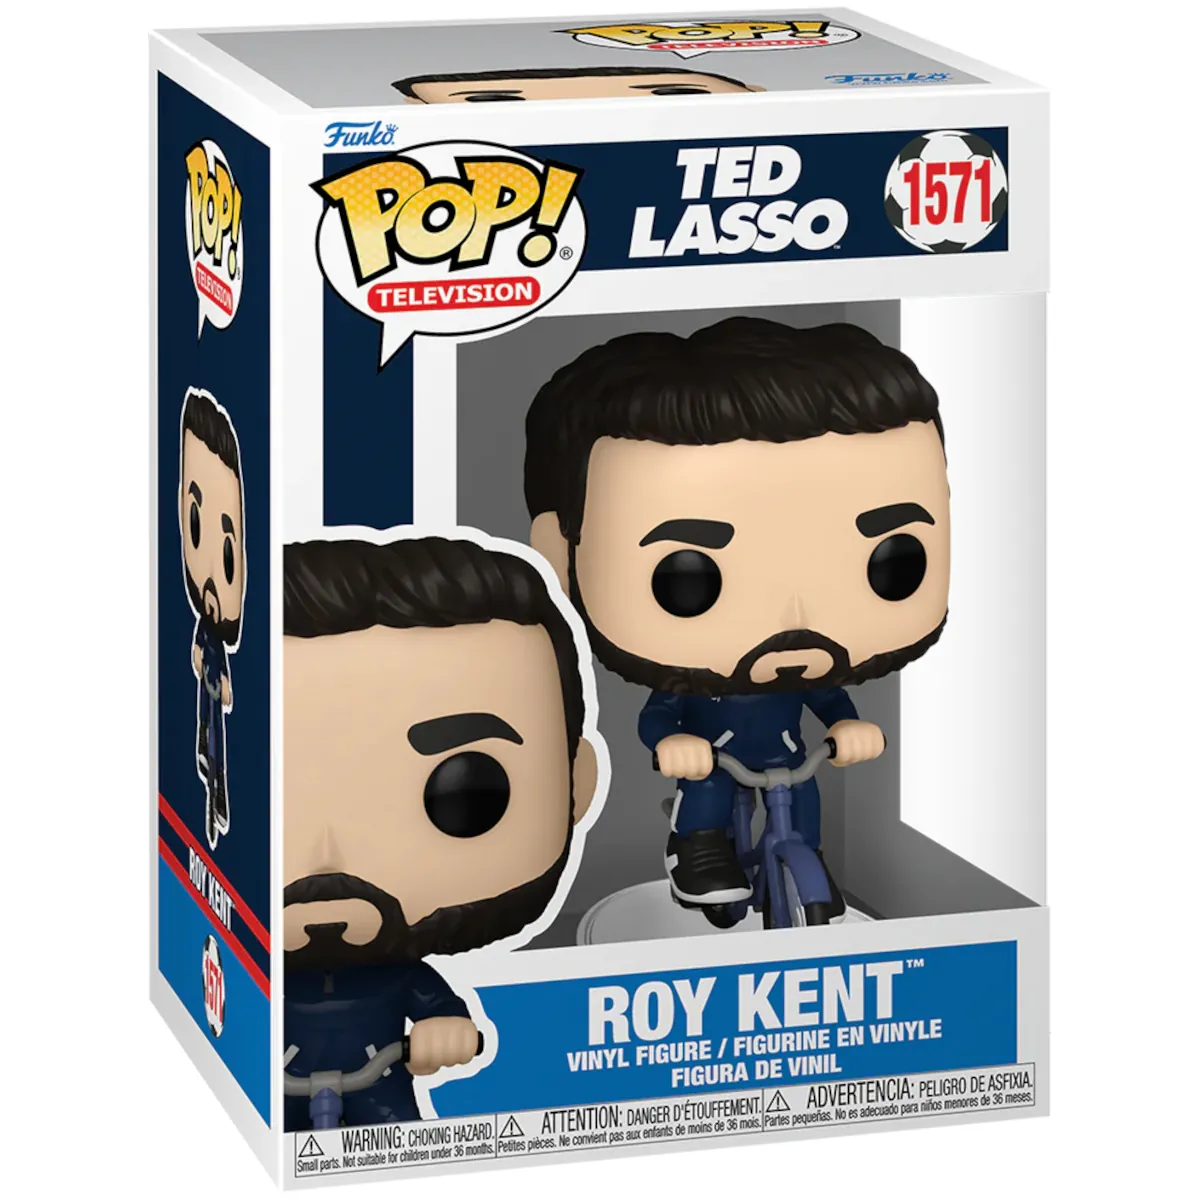 75716 Funko Pop! Television - Ted Lasso - Roy Kent (On Bike) Collectable Vinyl Figure Box Front